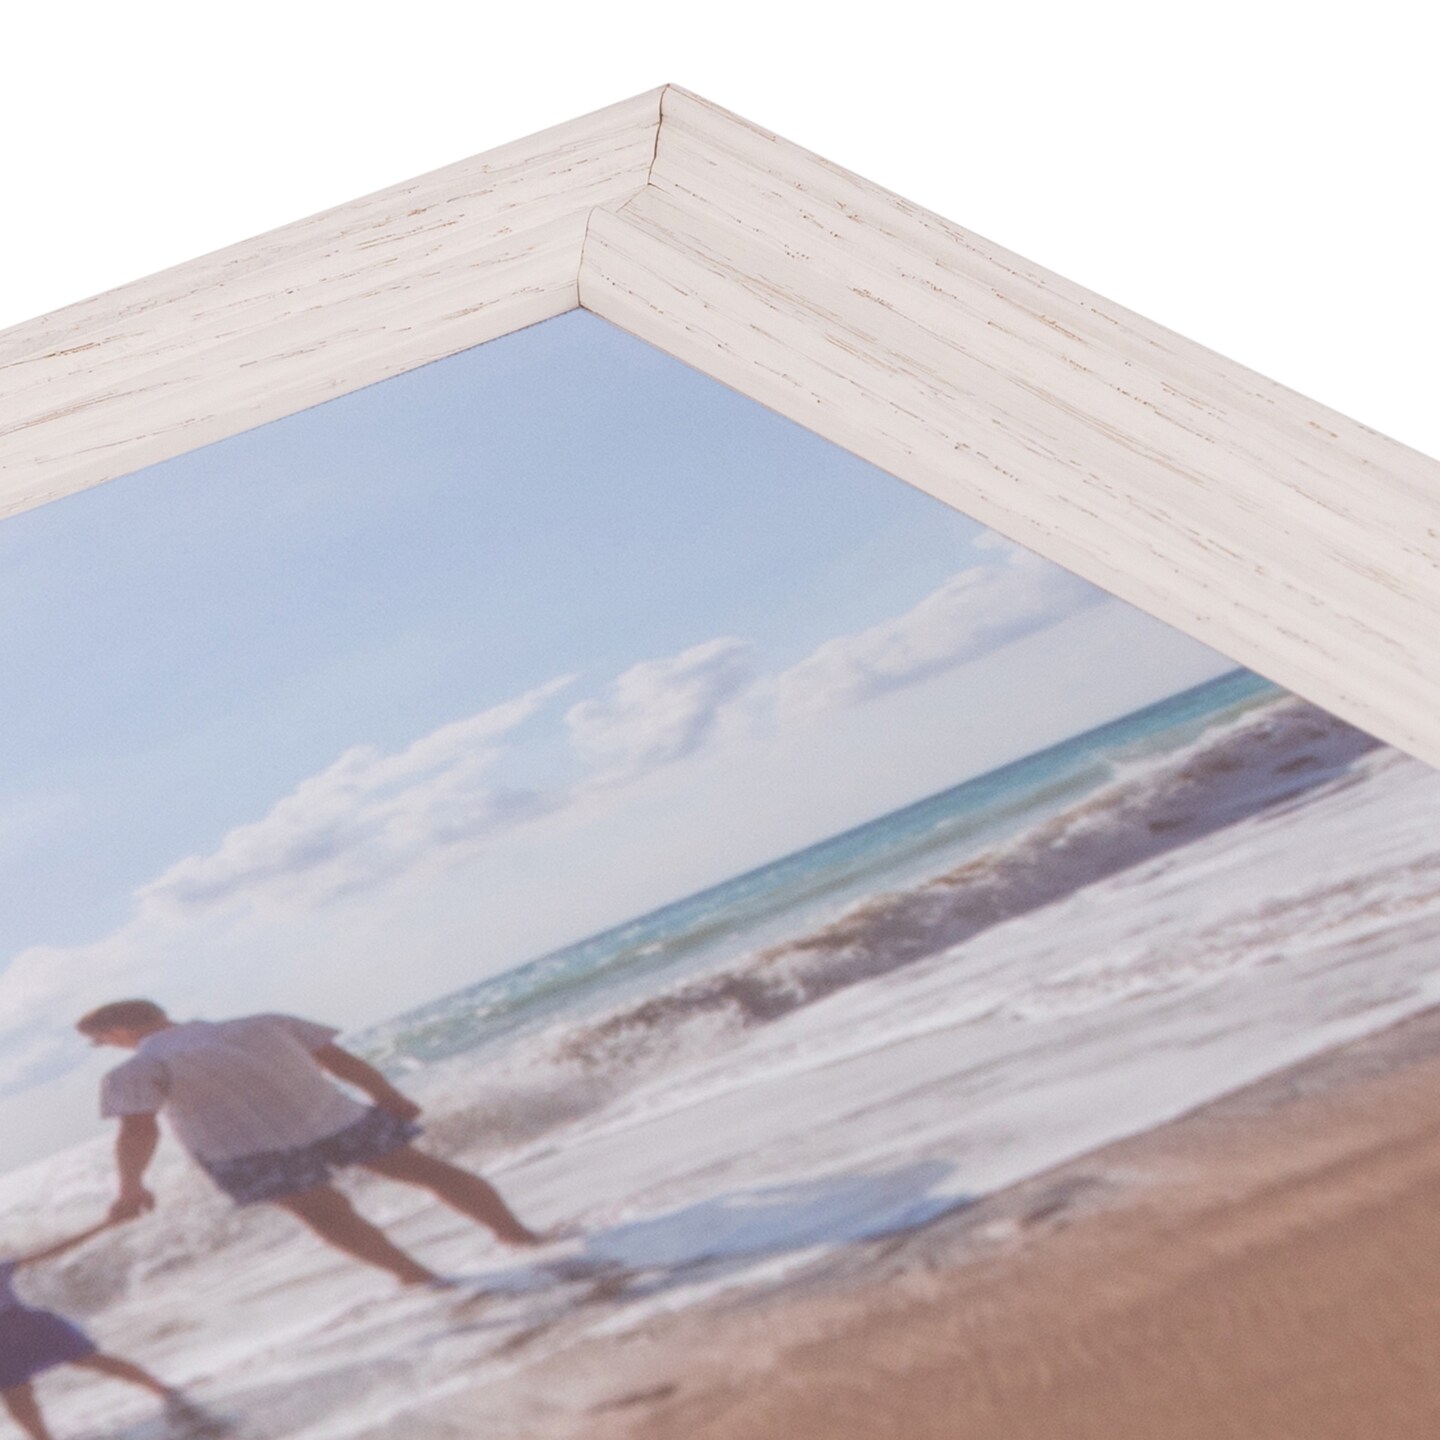 ArtToFrames 24x24 Inch  Picture Frame, This 1.5 Inch Custom Wood Poster Frame is Available in Multiple Colors, Great for Your Art or Photos - Comes with 060 Plexi Glass and  Corrugated Backing (A14RC)